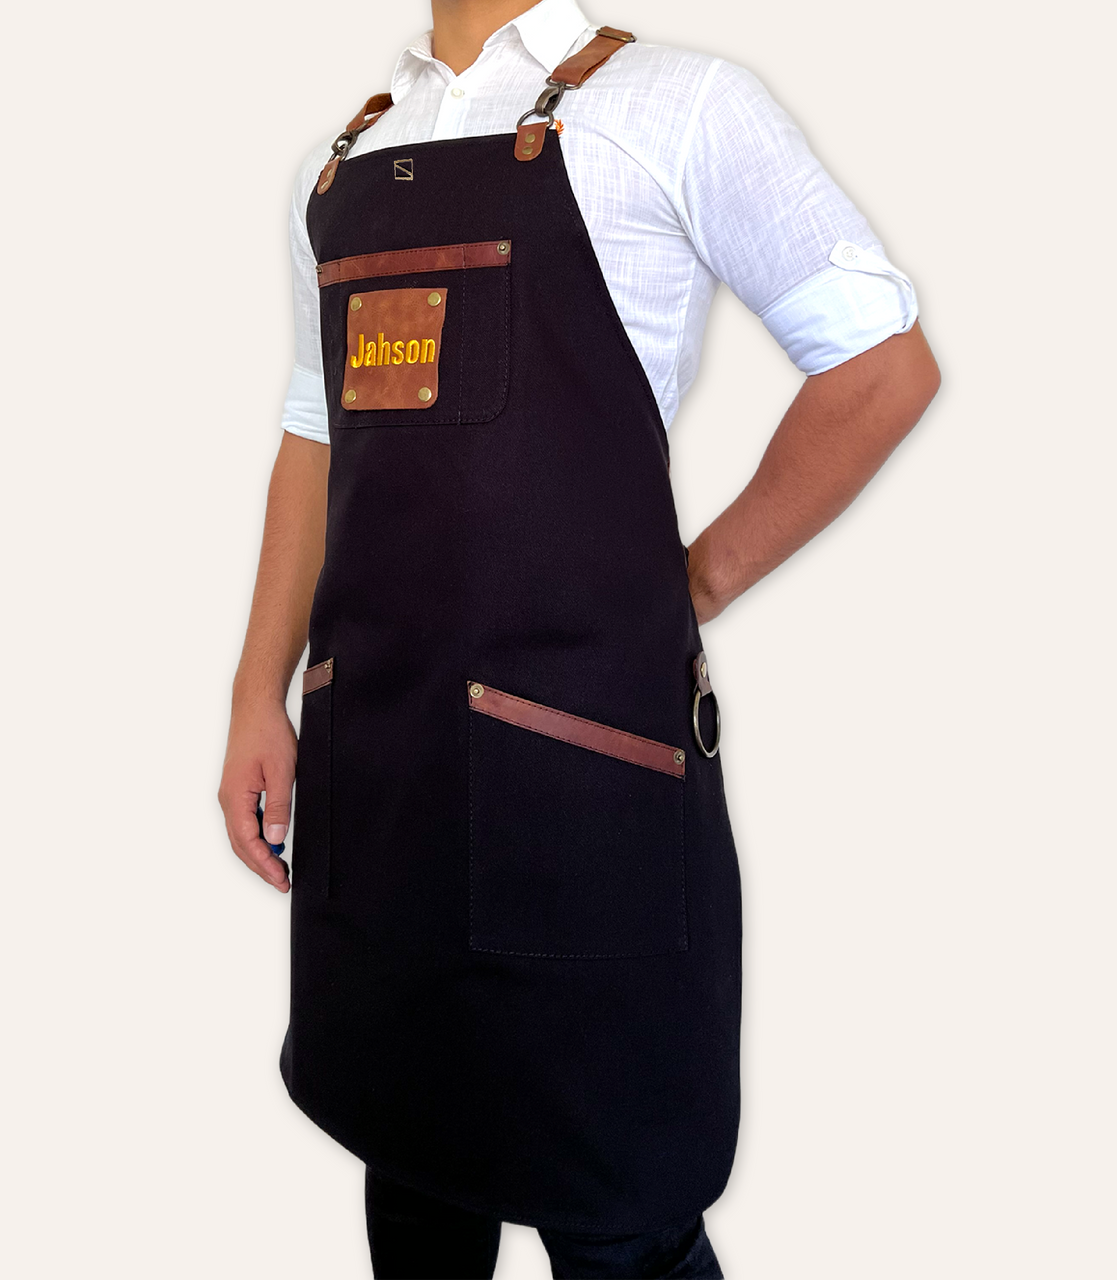 https://cdn11.bigcommerce.com/s-4lp3aqlzu7/images/stencil/1280x1280/products/257/1196/Durable_Black_Canvas_water_proof_Apron_with_Cross-Back_Leather_Straps__78316.1693968185.png?c=1